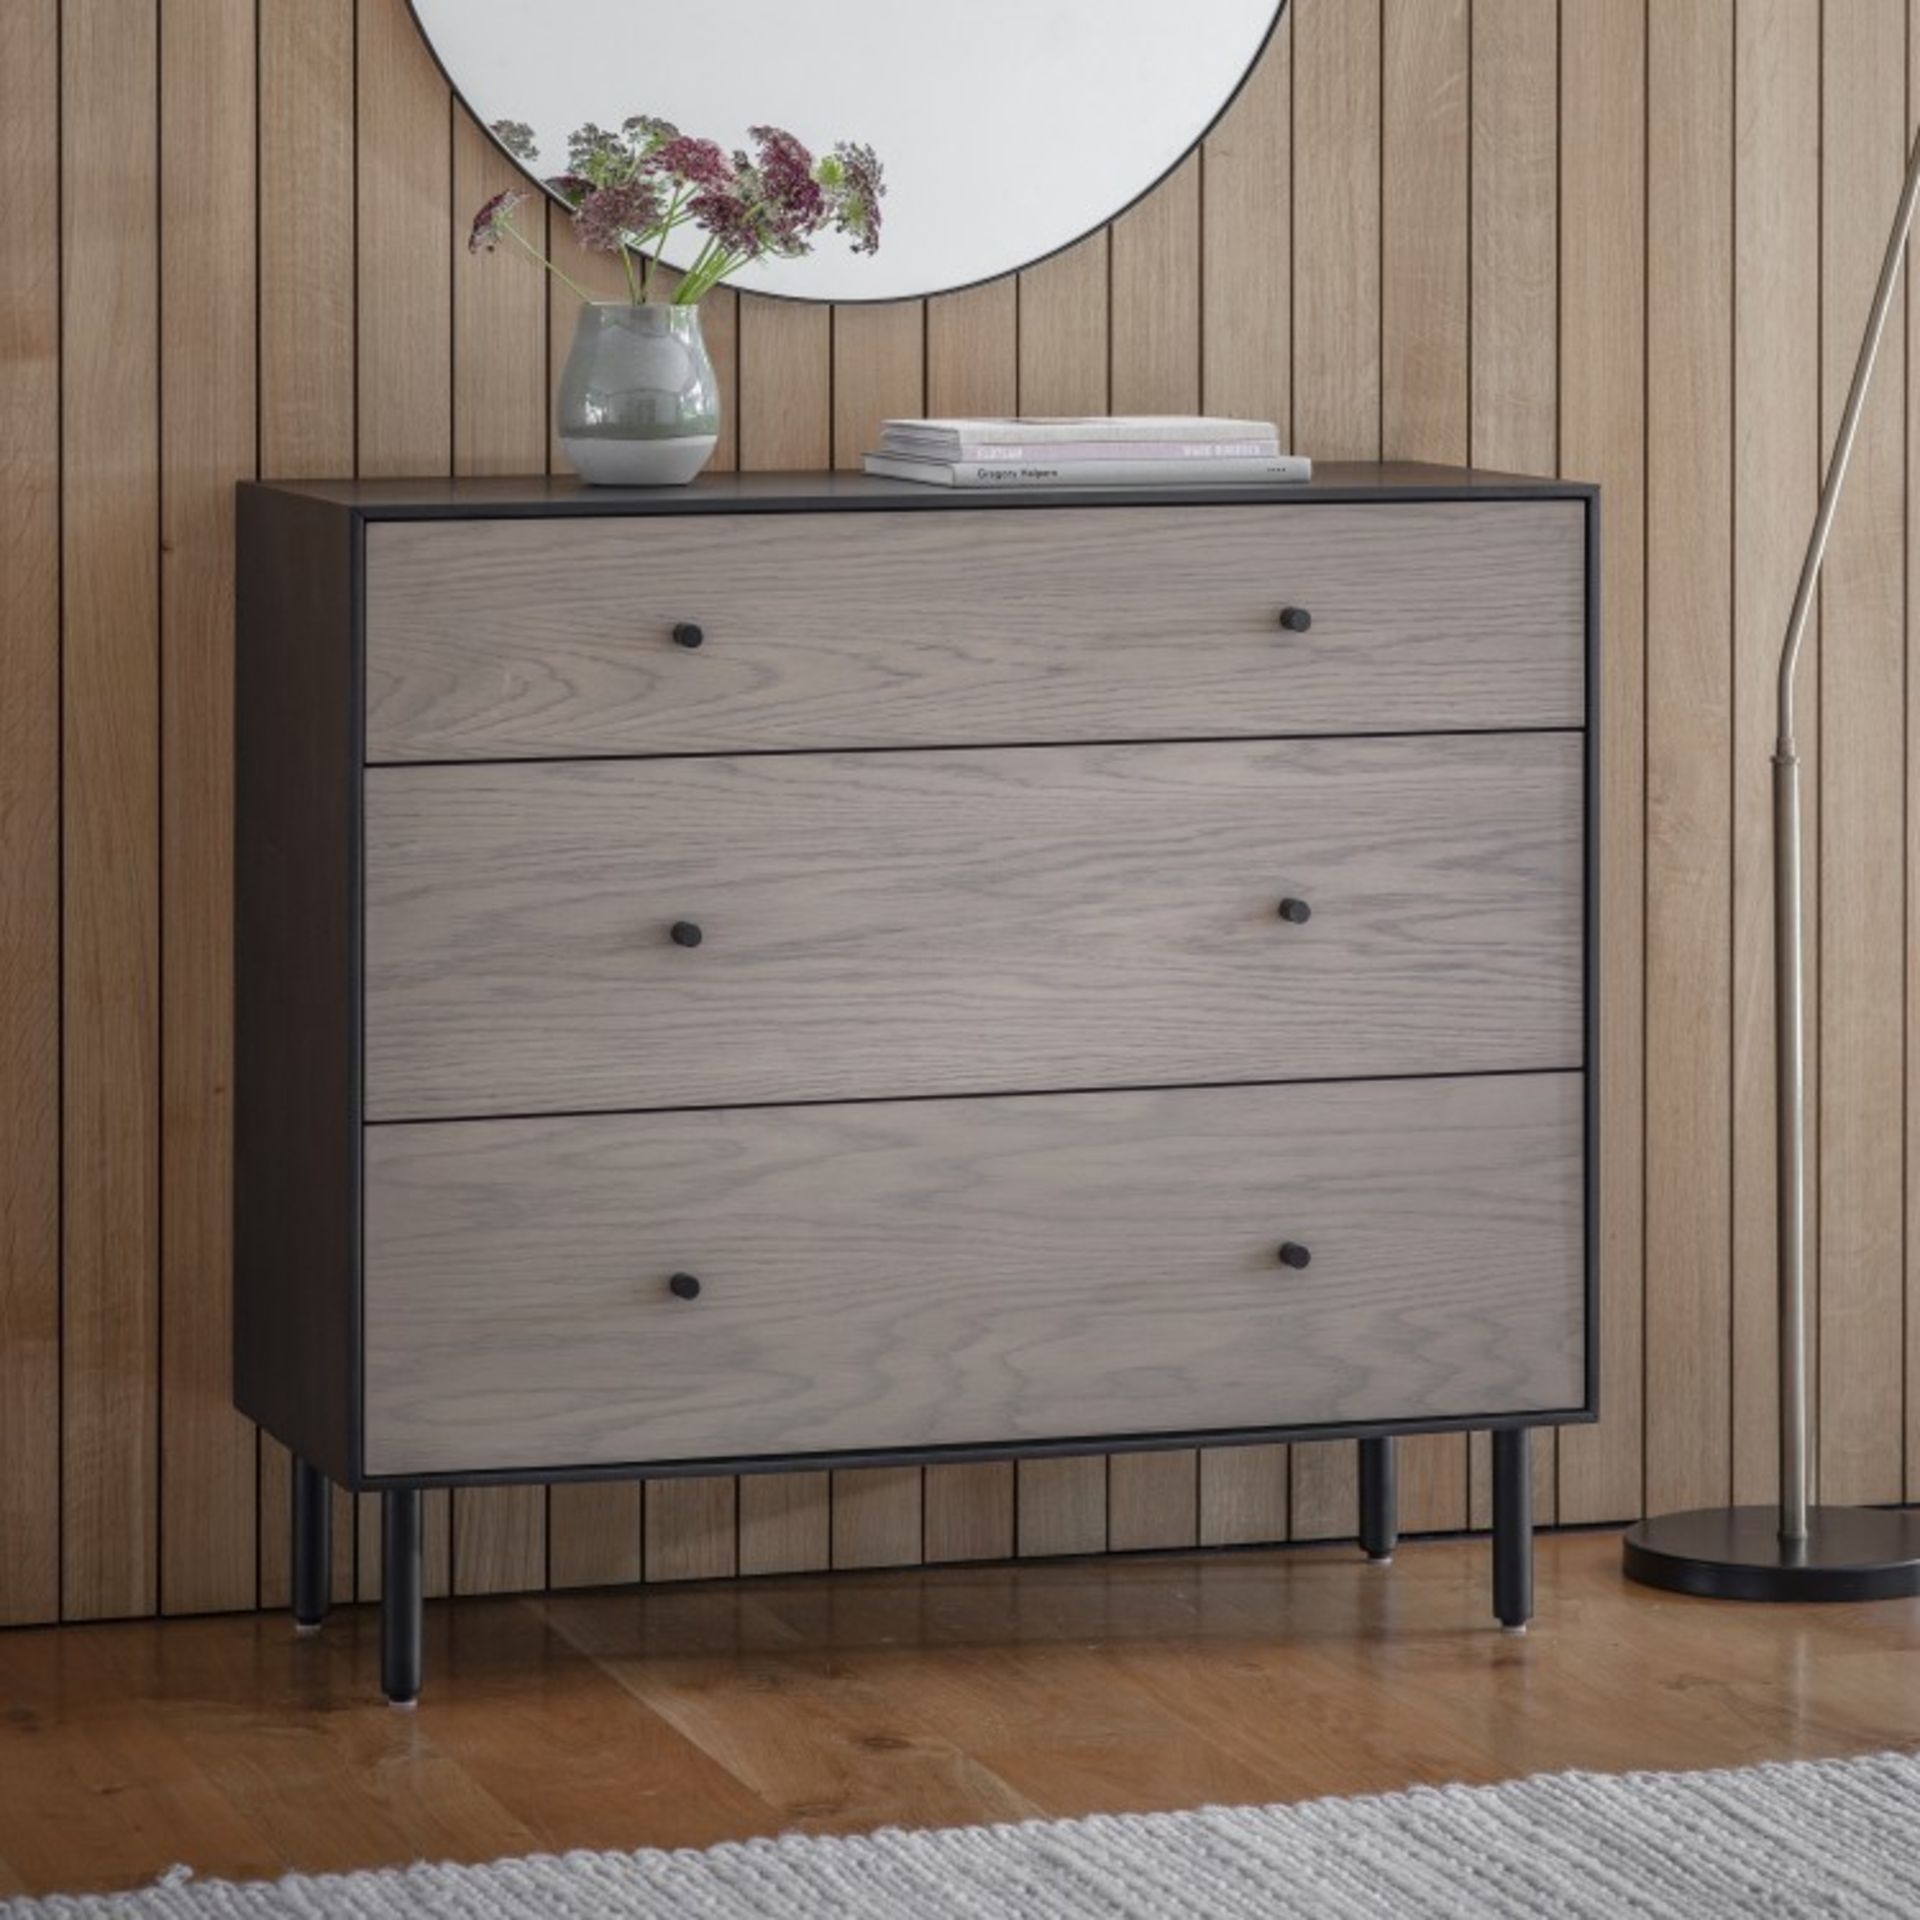 Carbury 3 Drawer Chest 1000x420x900mm Stylish collection of Oak Veneer furniture perfect for